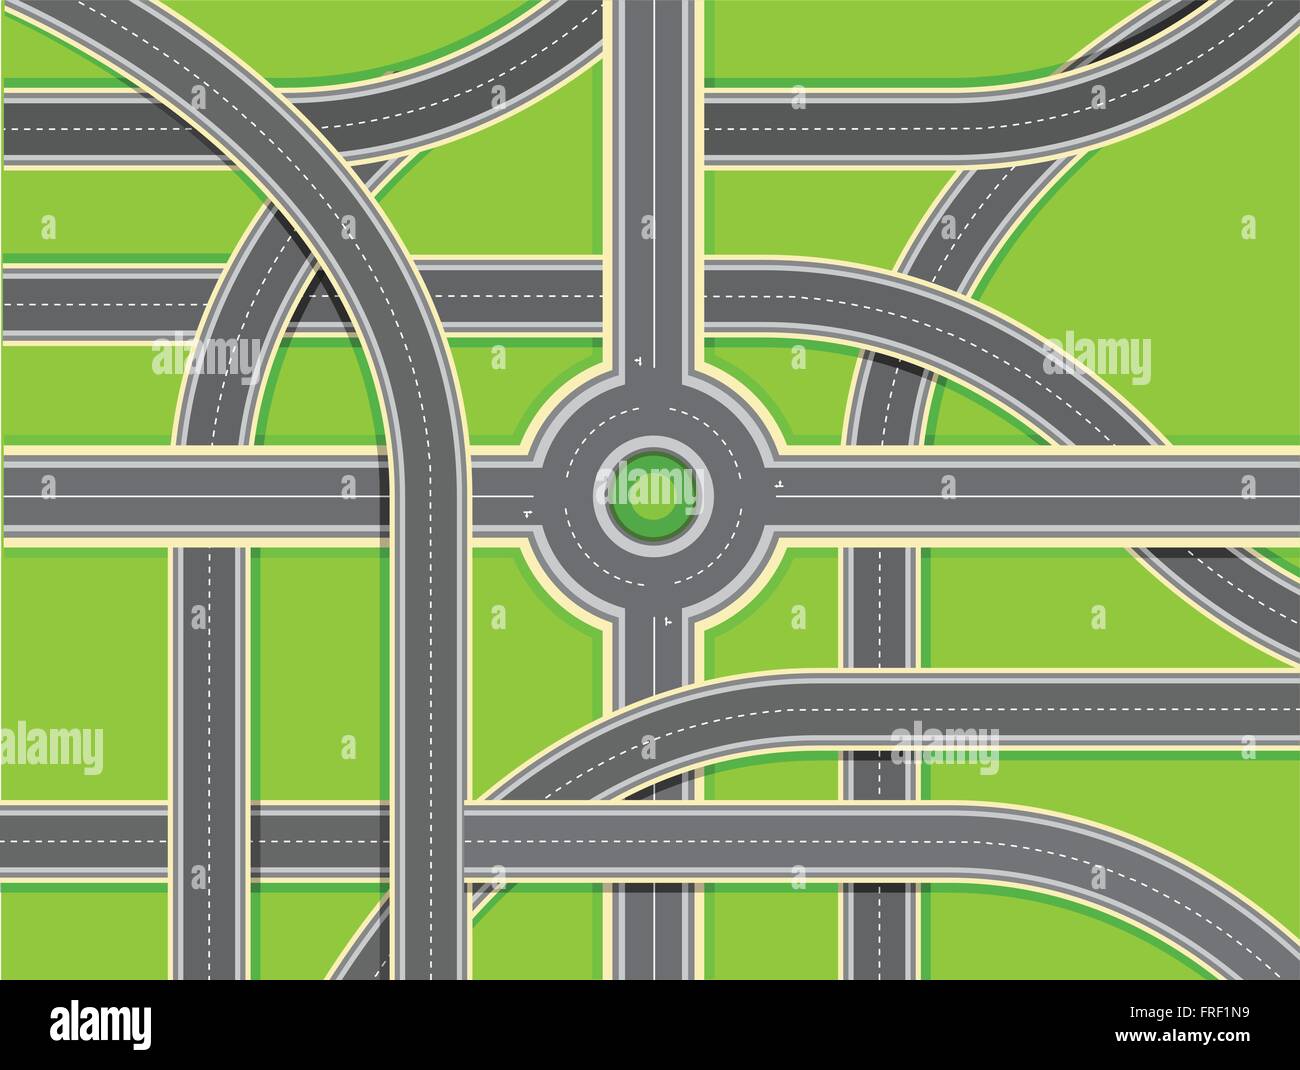 Aerial View - Top View Roads Intersections, Highways Stock Vector